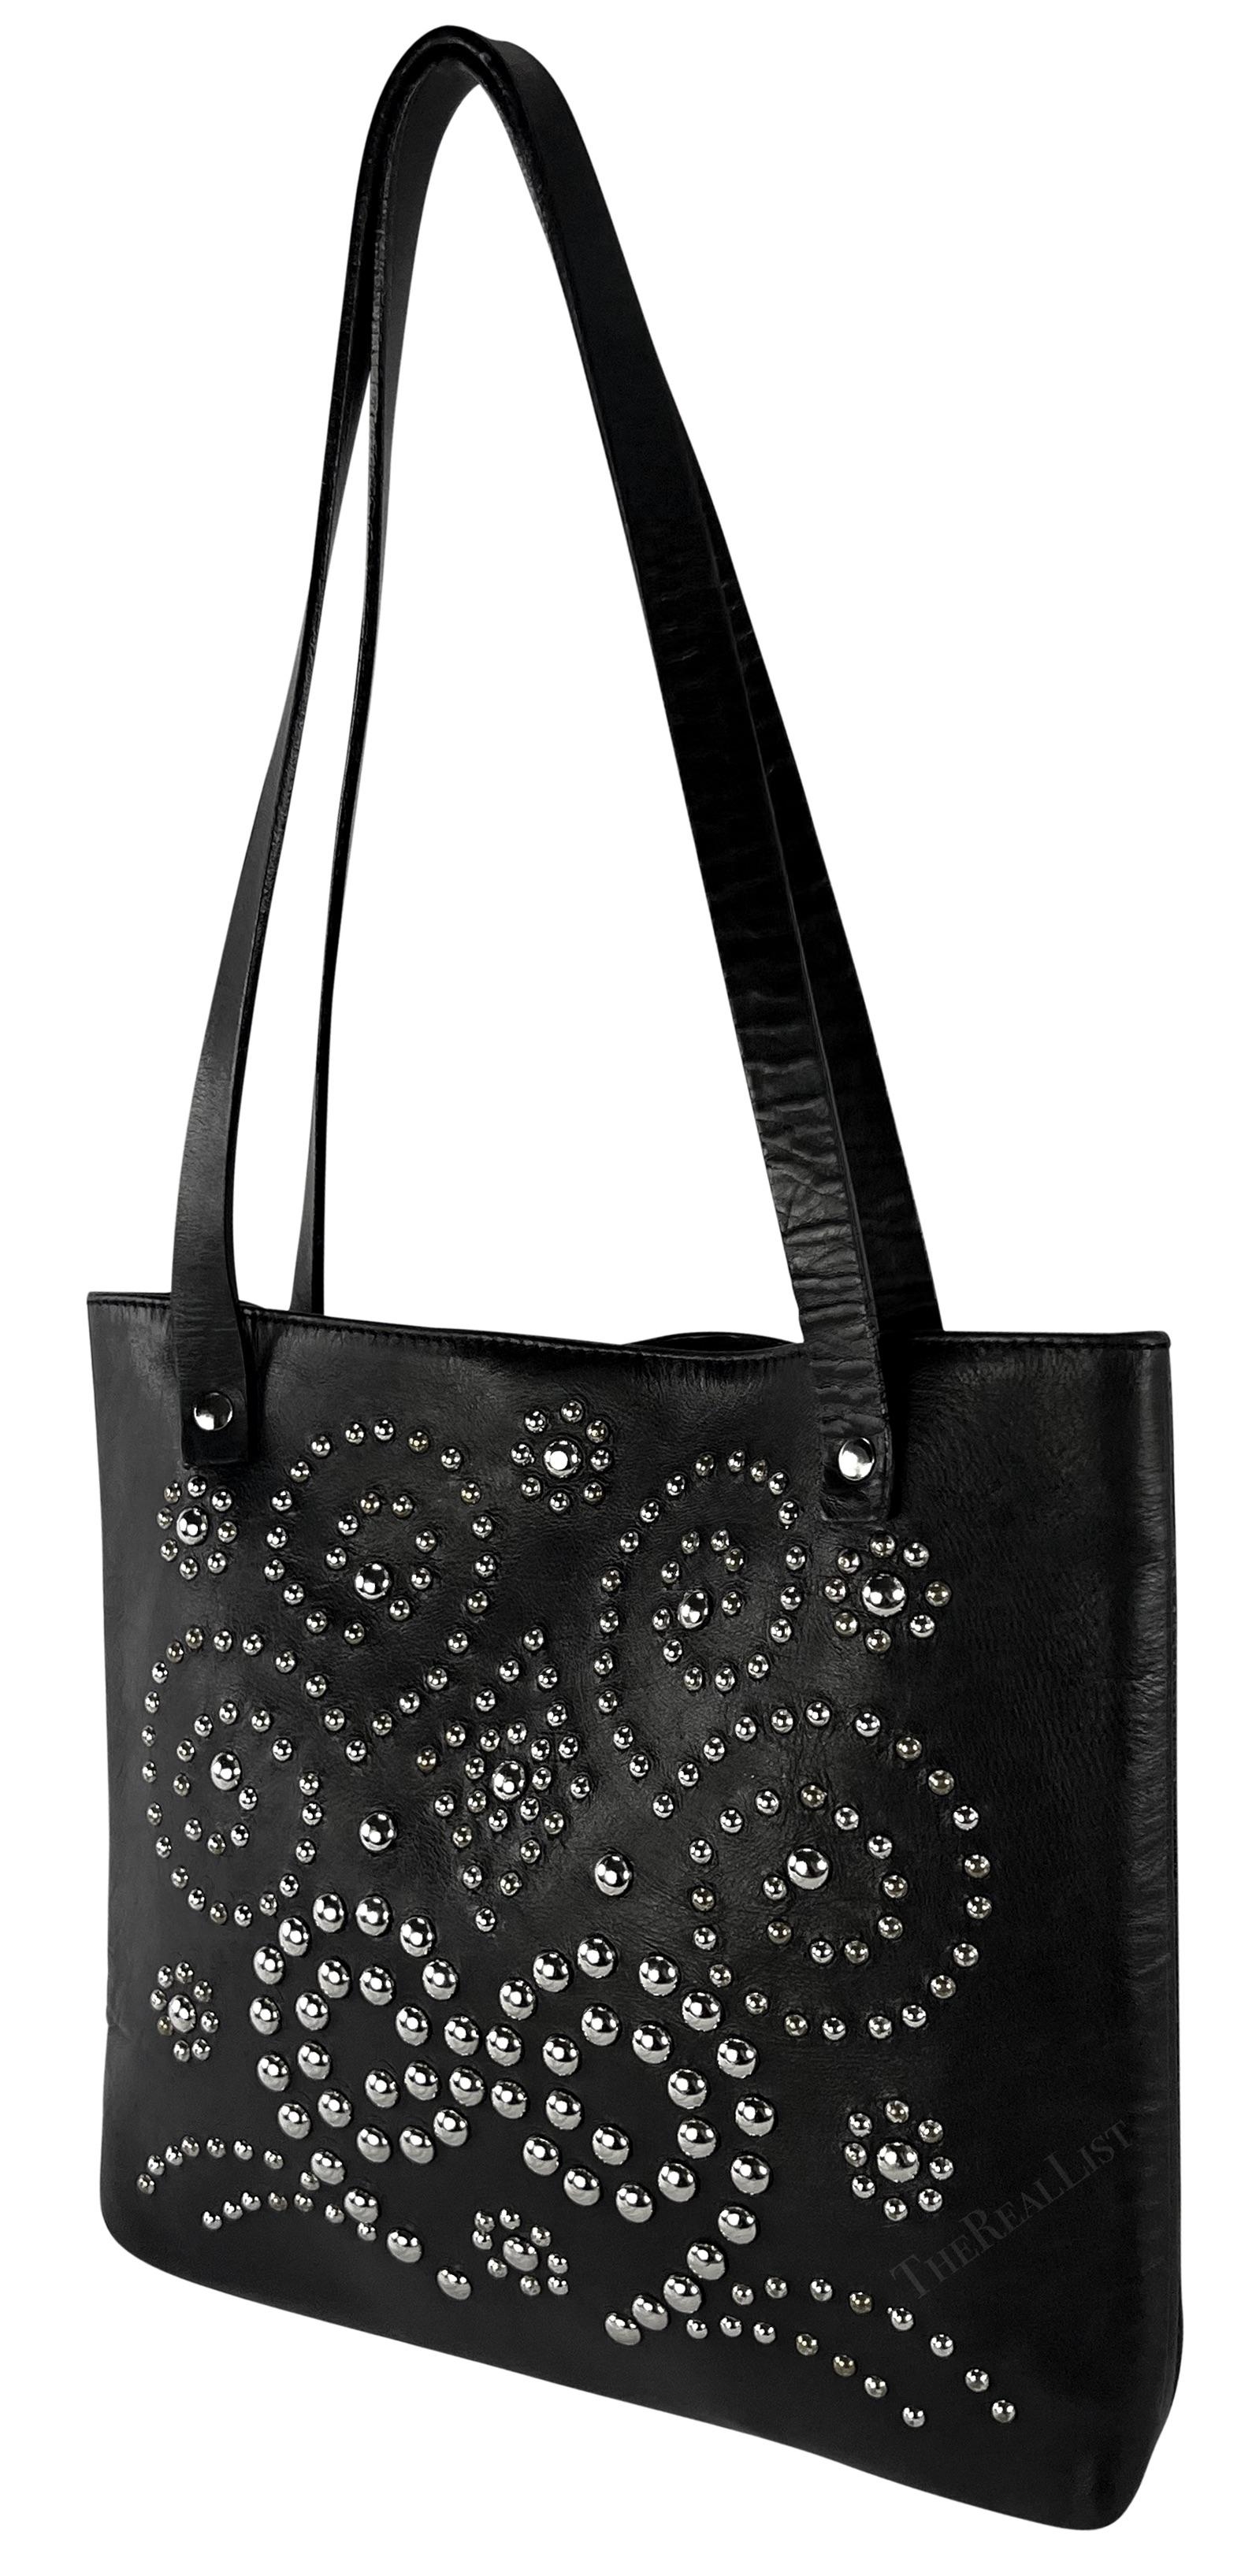 Late 1990s Dolce & Gabbana Black Leather Studded Small Shoulder Tote Bag In Good Condition For Sale In West Hollywood, CA